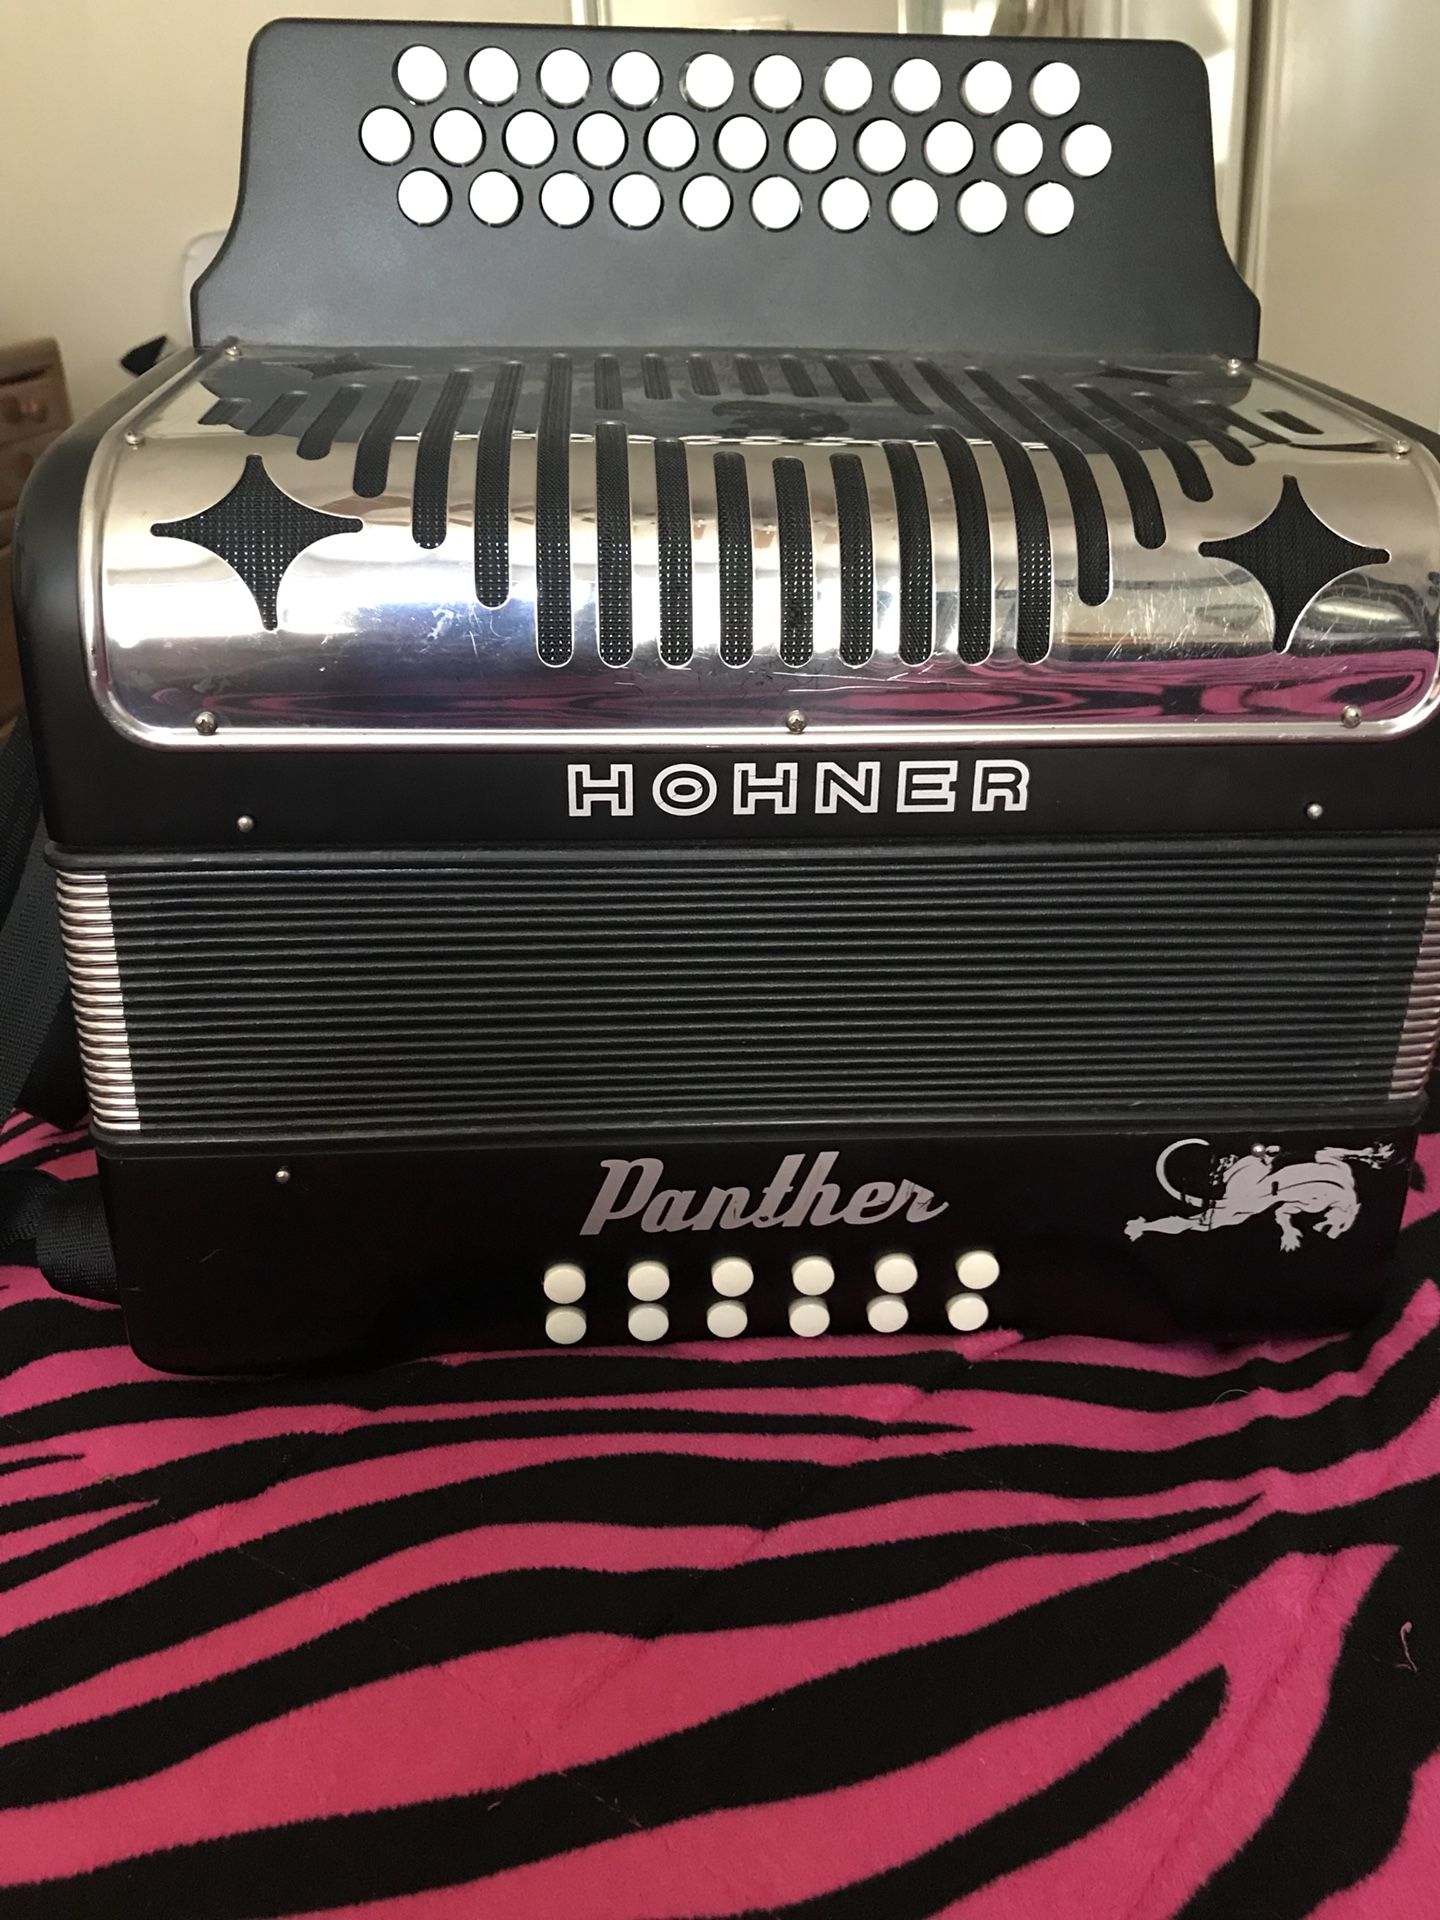 Acordeón Hohner Panther F for Sale in San Marcos, CA - OfferUp